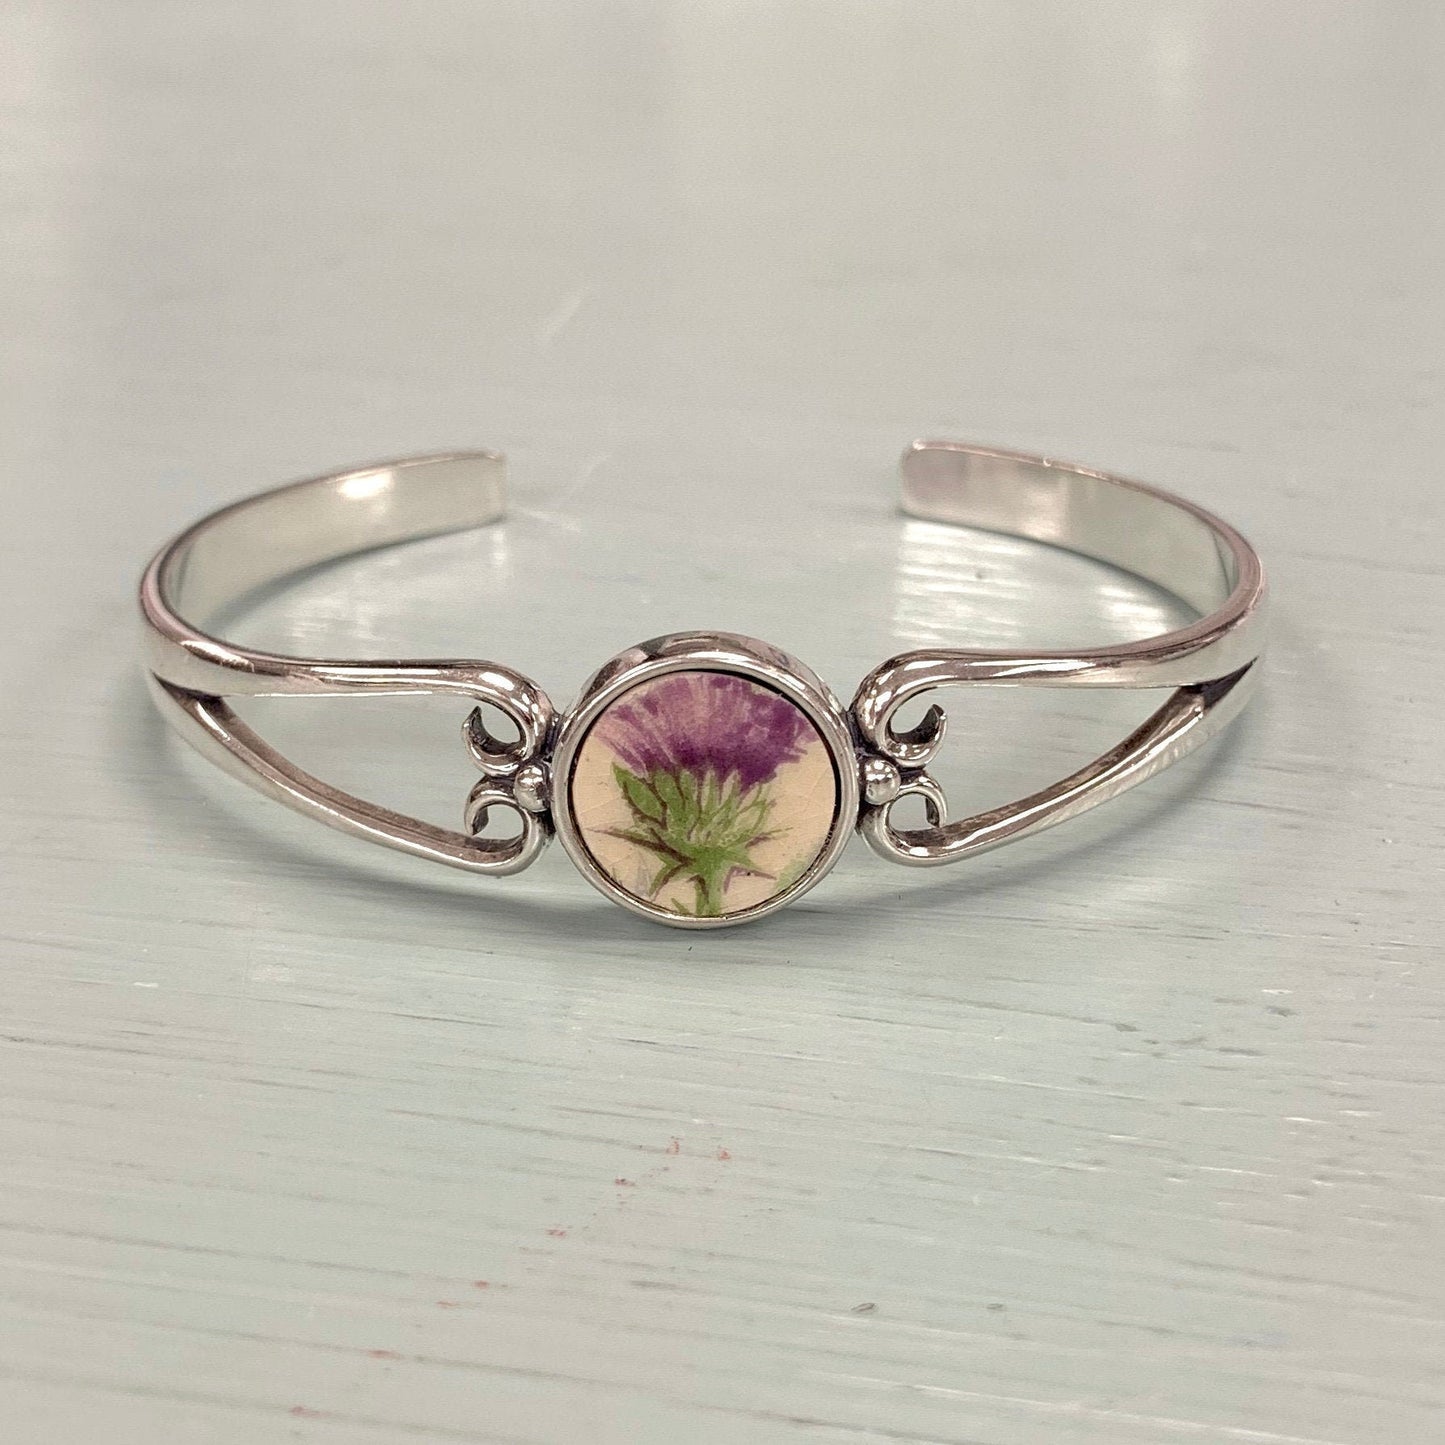 Scottish Thistle Cuff Bracelet, Sterling Silver Jewelry, Bracelets for Women, Broken China Jewelry, Unique Anniversary Gift for Wife